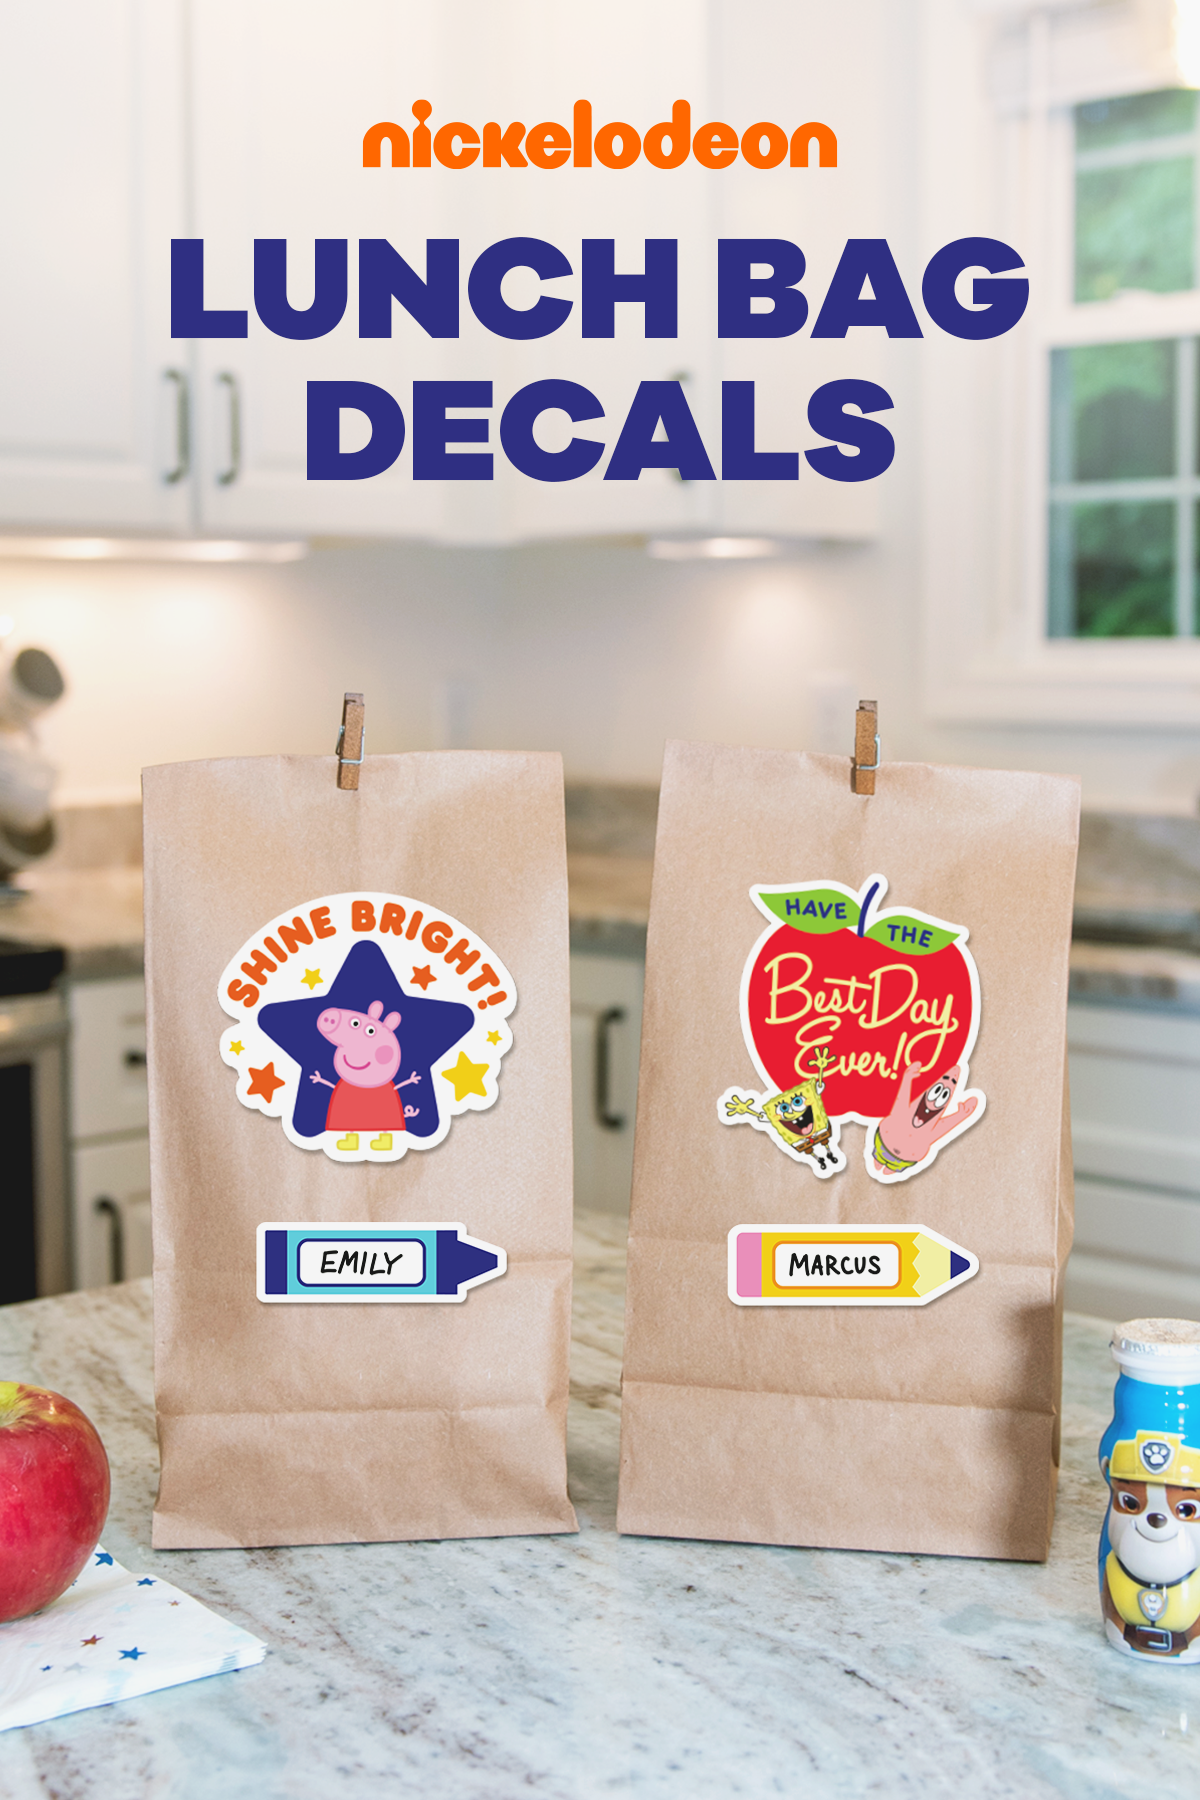 https://www.nickelodeonparents.com/wp-content/uploads/2020/09/MP_Lunch_Bag_Decals_2x3.png